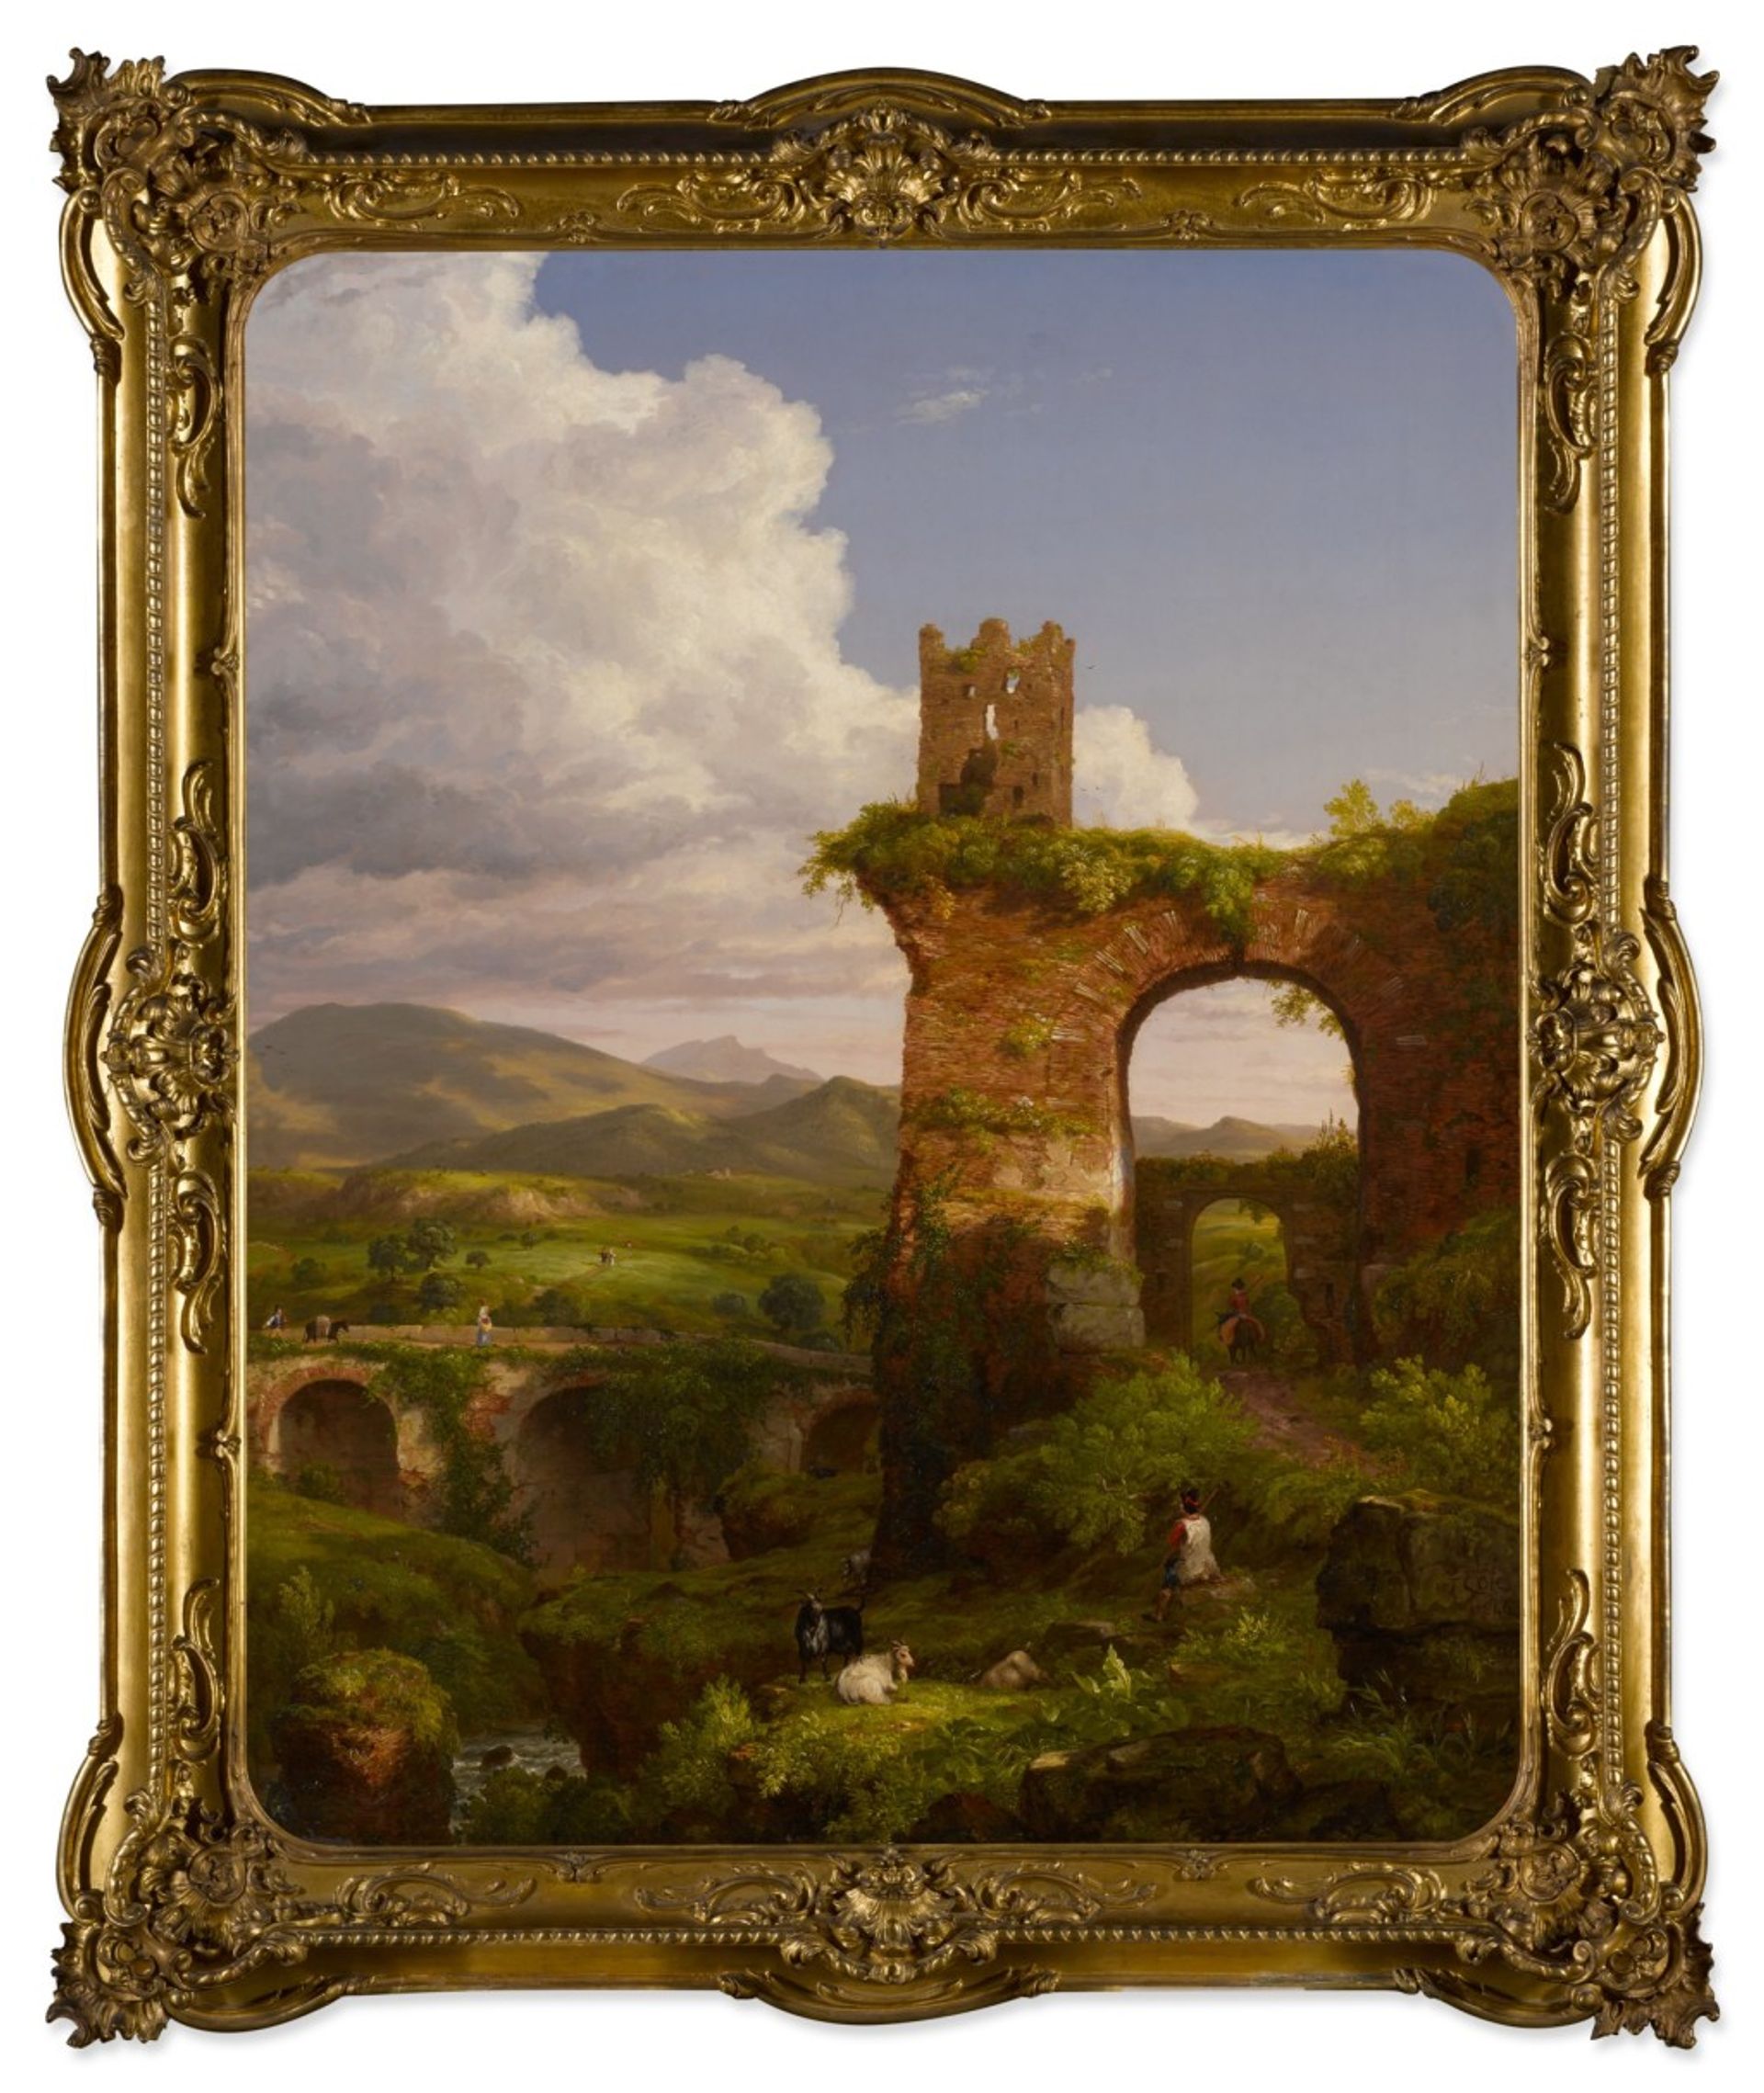 The Newark Museum is putting Thomas Cole's The Arch of Nero (1846) on the auction block at Sotheby's, carrying an estimate of  $500,000-$700,000 